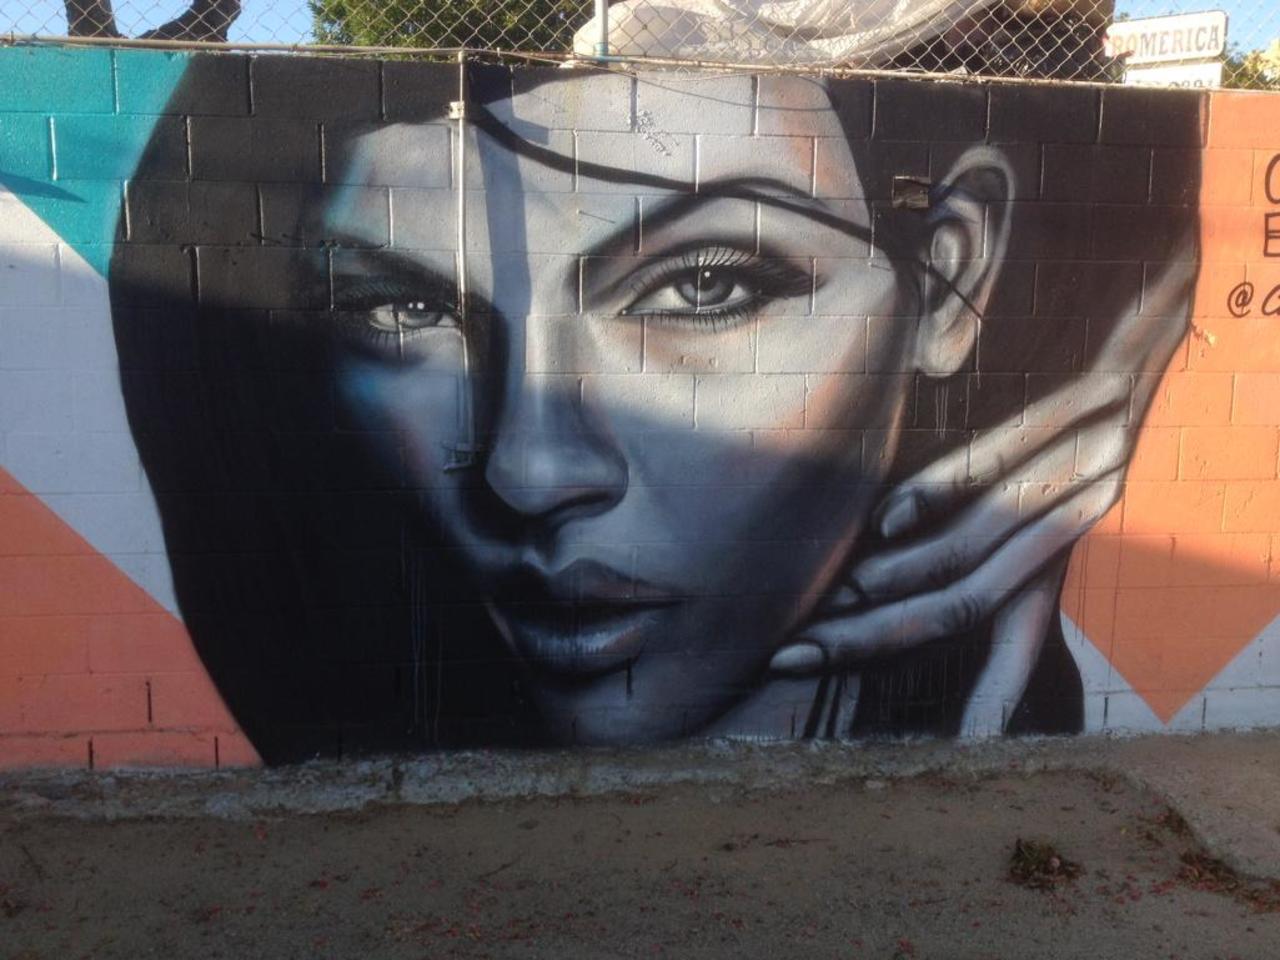 Beauty can be timeless when captured on a wall. #Streetart portrait in downtown #SanDiego. #Graffiti photo by me! http://t.co/p6epnsPc5d